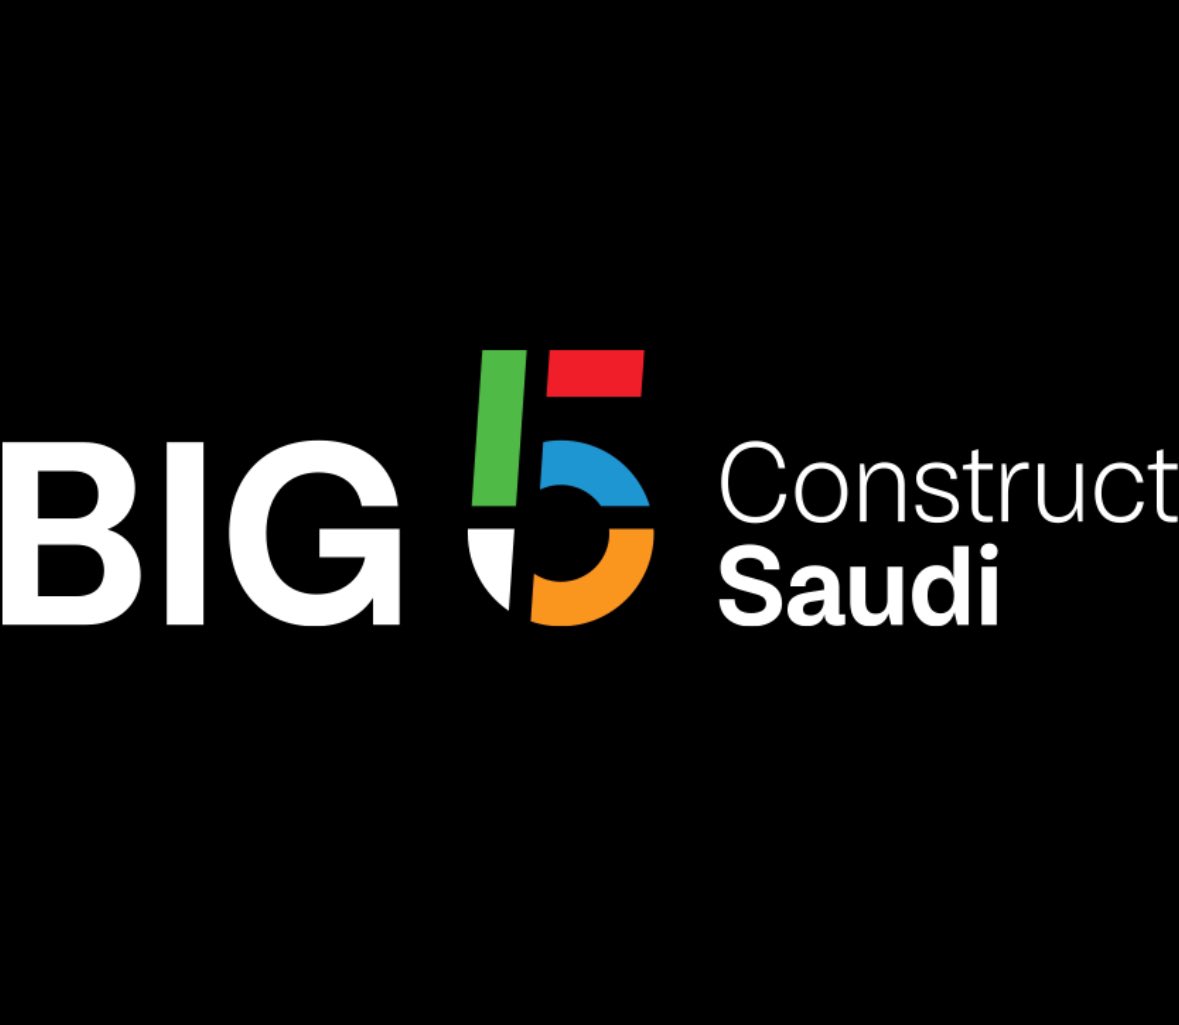 Big5 Construct Saudi starts in 11 days! Please visit out booth No. 3F88 to discuss your requirements when it comes to hotwire & fastwire CNC cutting machines. CU in Riyadh! #proudlyMadeInPoland #expo #exhibition #cnc #hotwire #fastwire #Poland #KSA #Riyadh